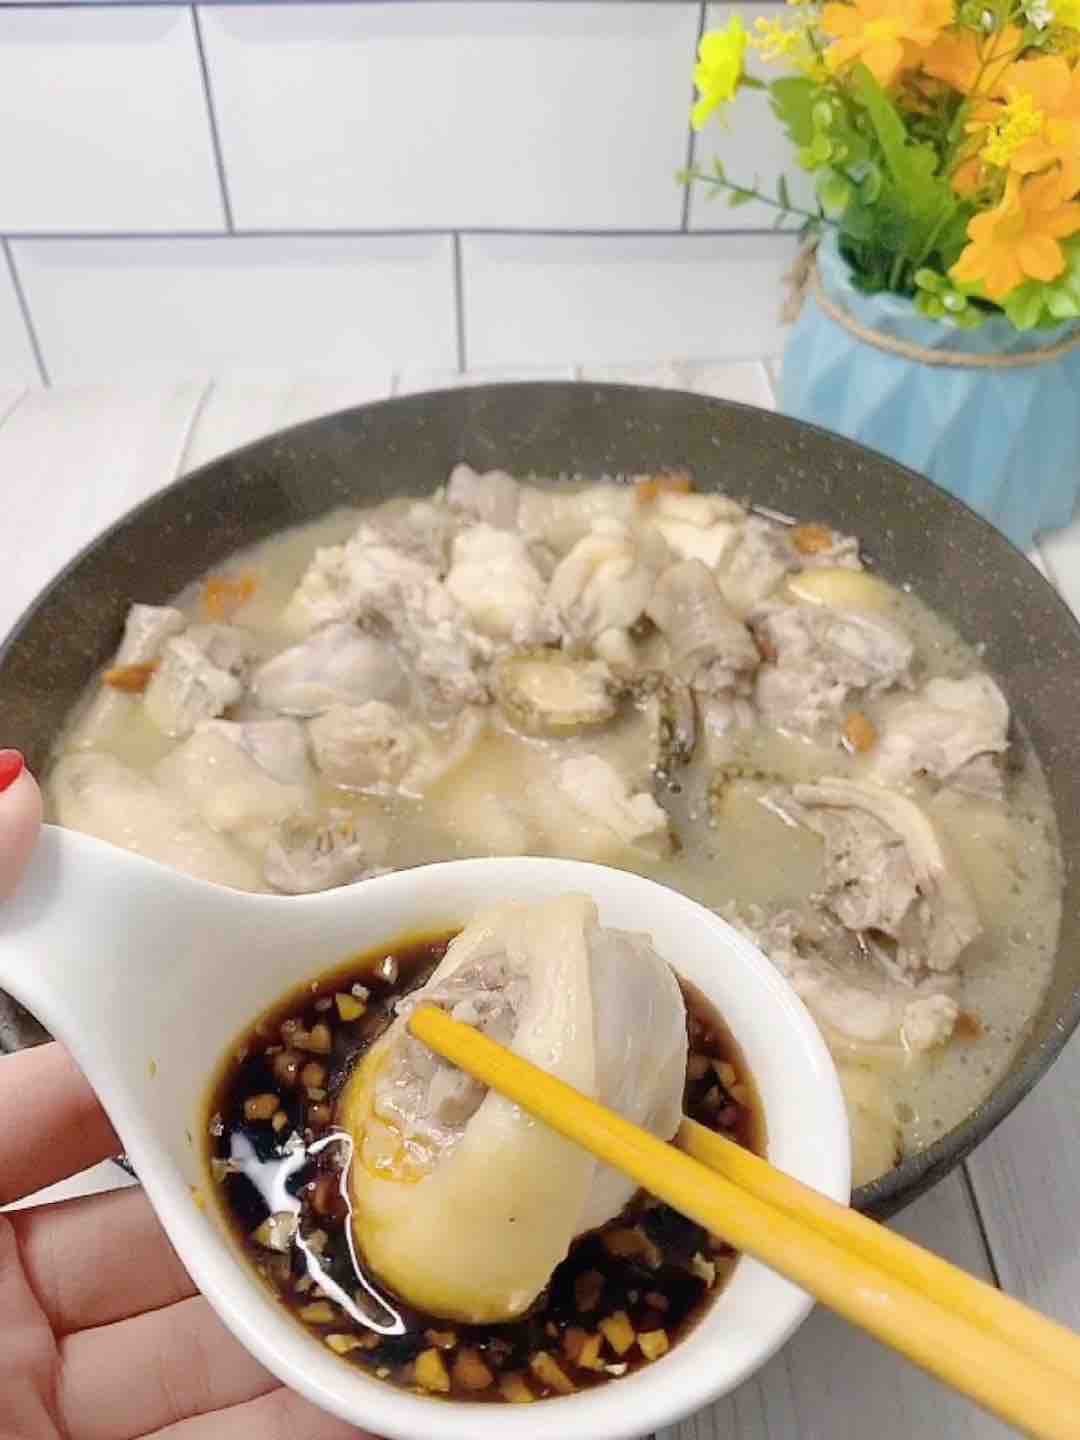 Eat Delicious Coconut Abalone Chicken at Home without Leaving Home recipe